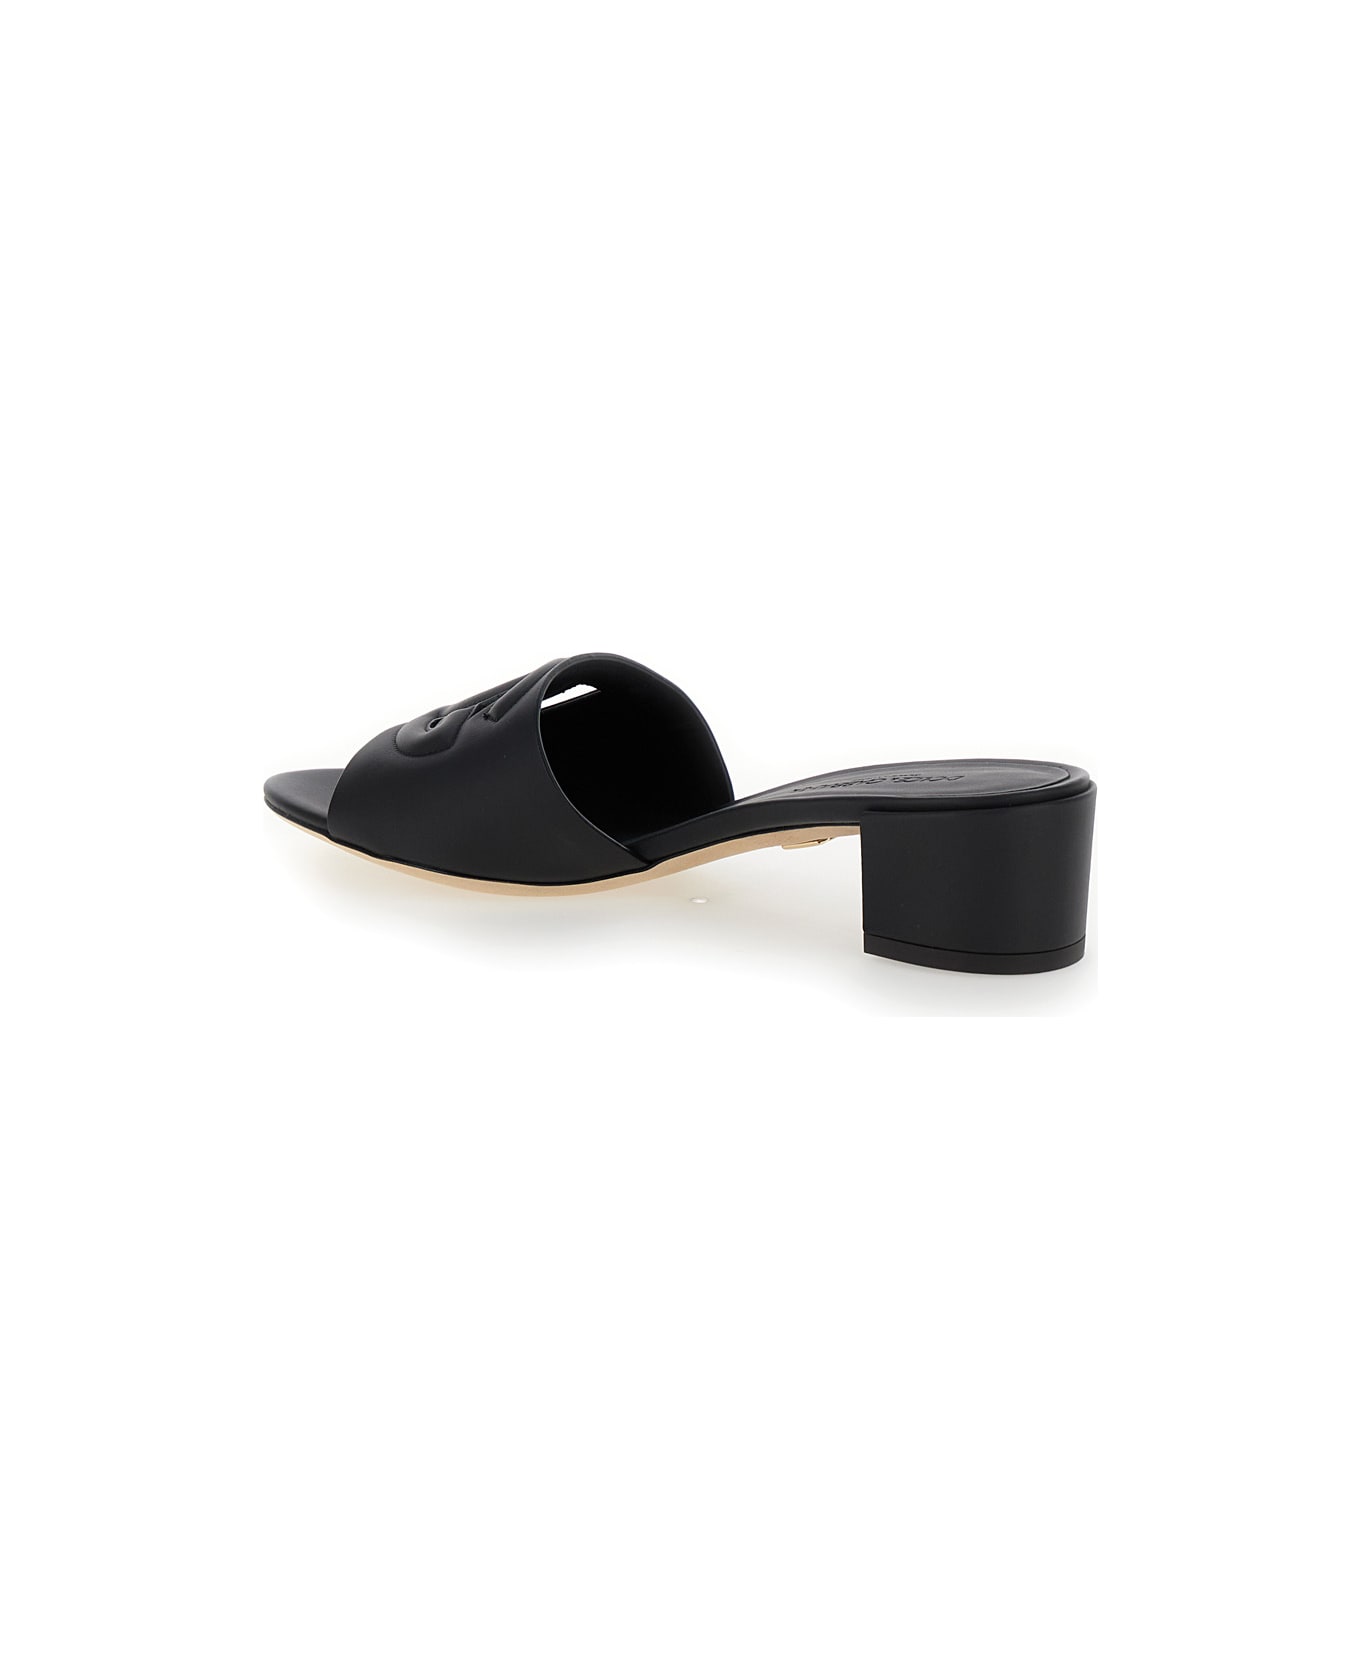 Dolce & Gabbana Black Mules With Low Heel And Dg Millennials Detail In Smooth Leather Woman - Black